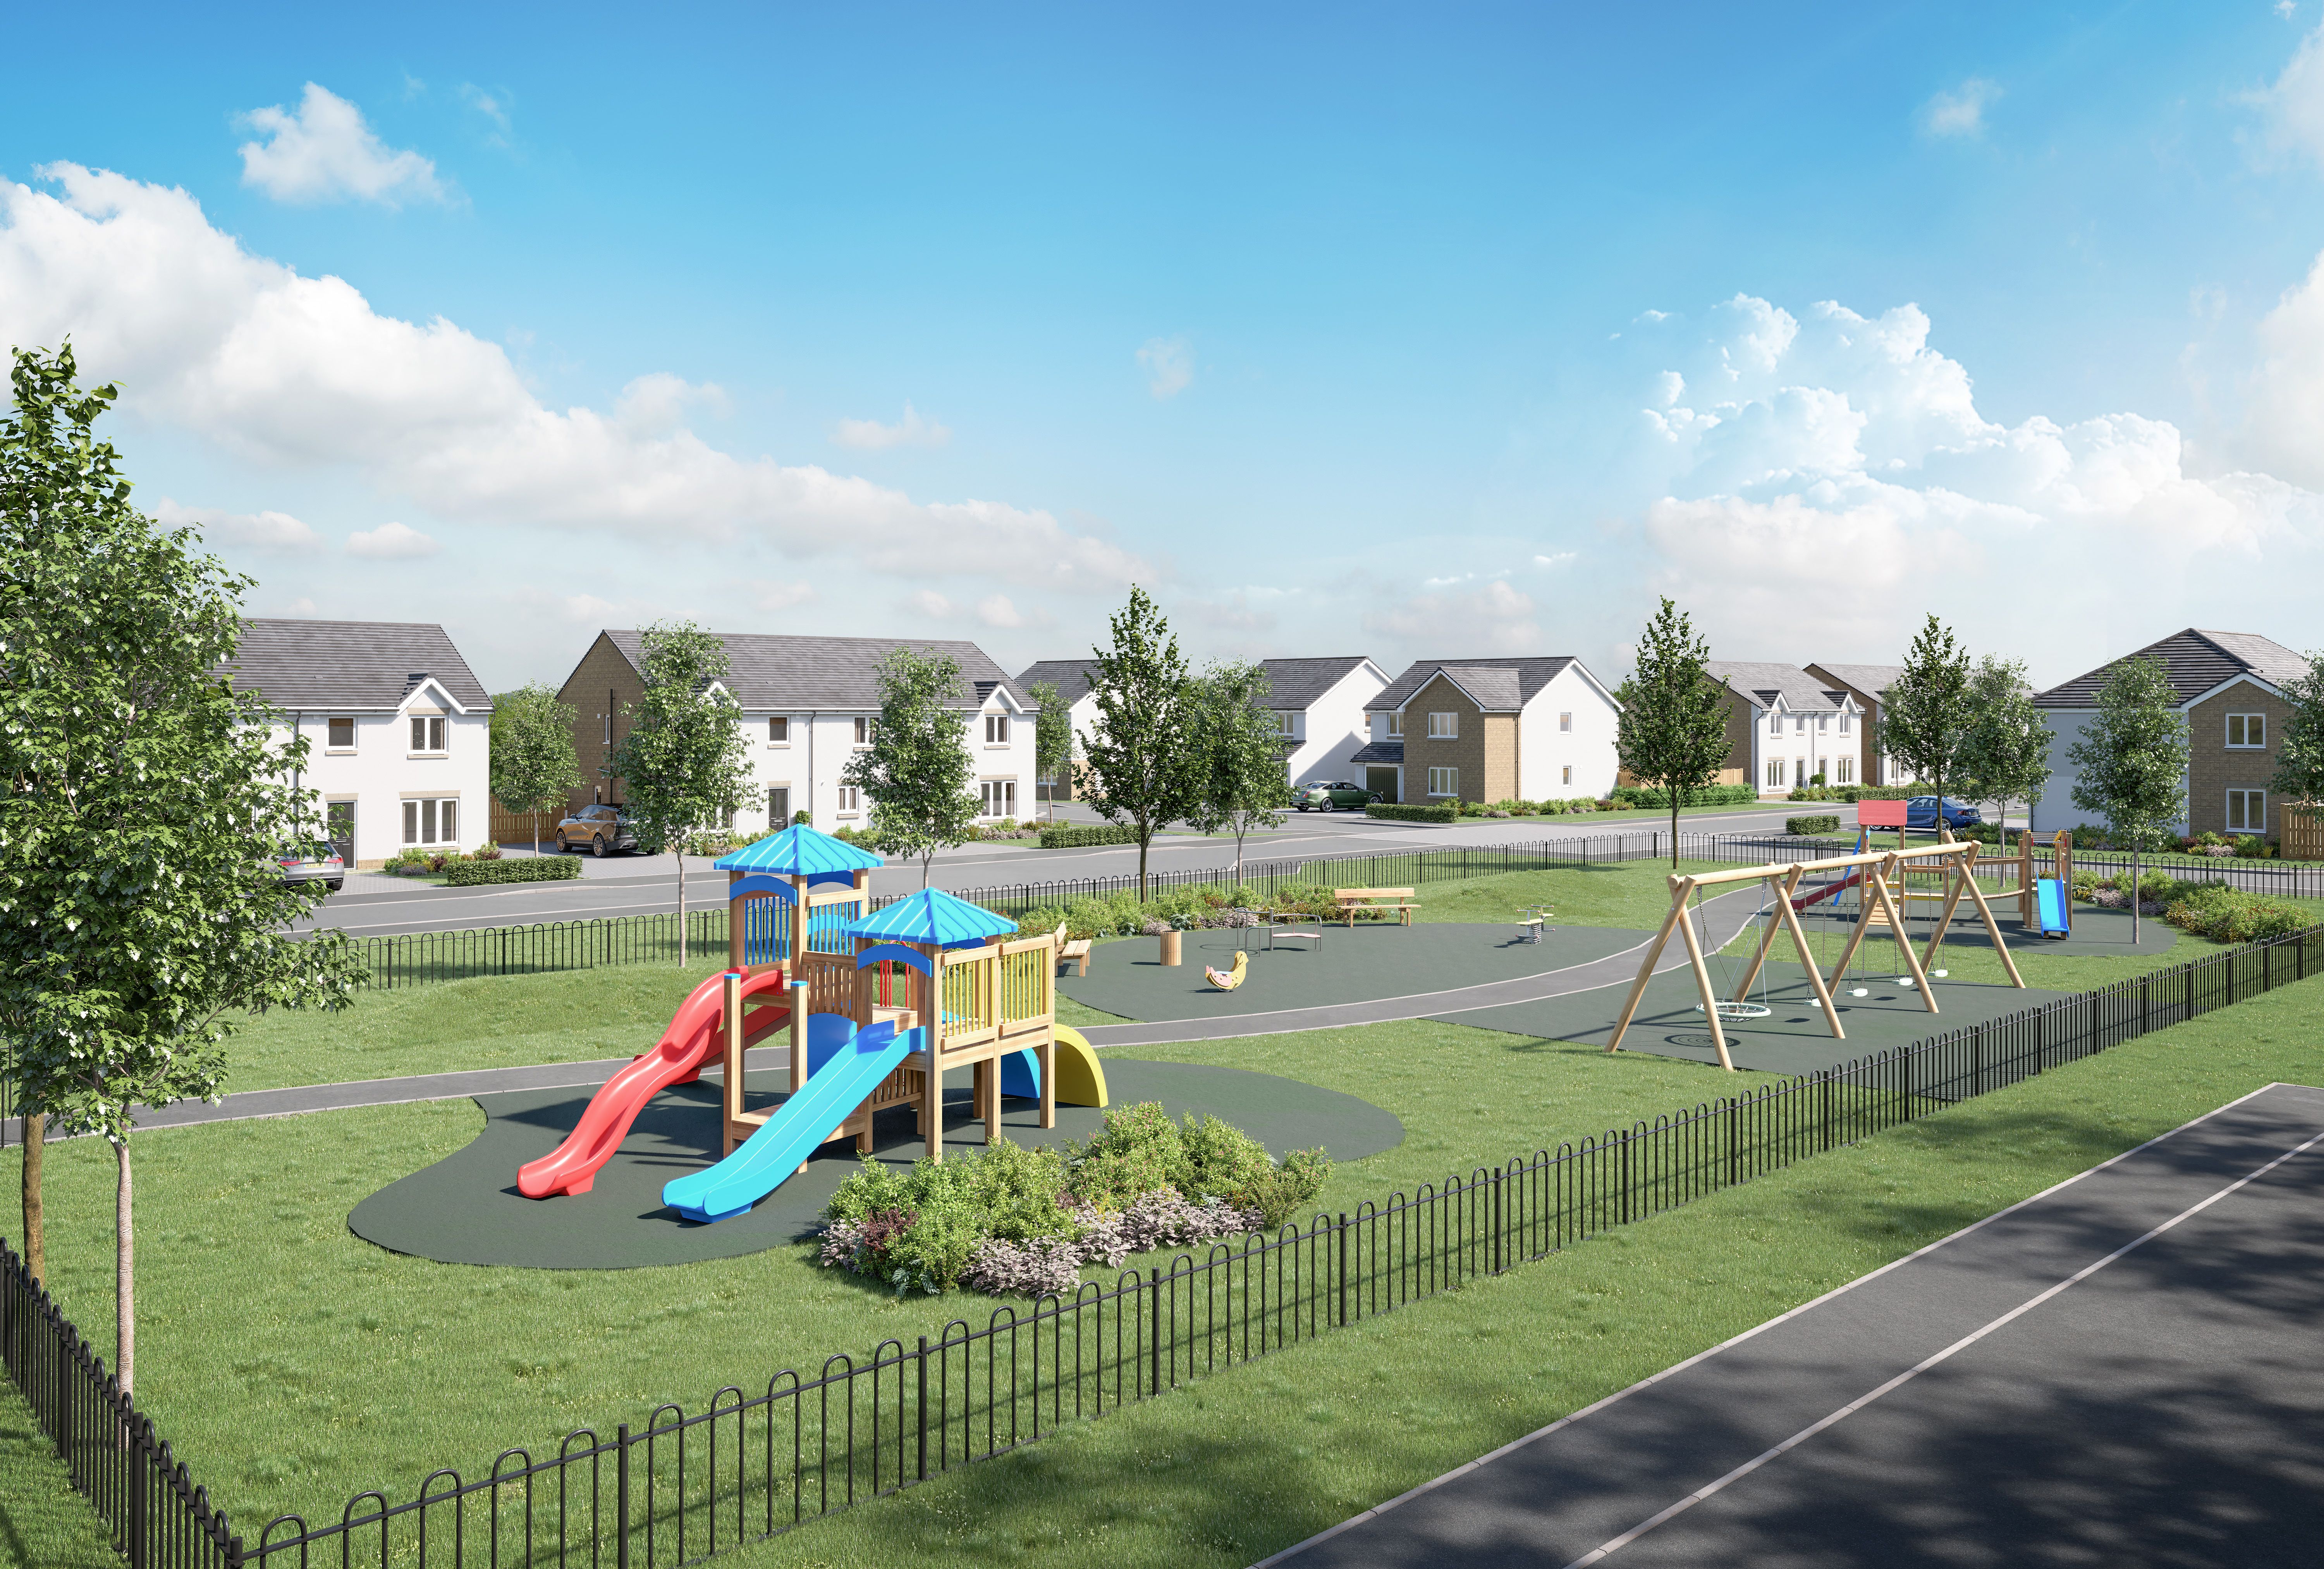 Taylor Wimpey secures planning for more than 500 homes in Glenboig